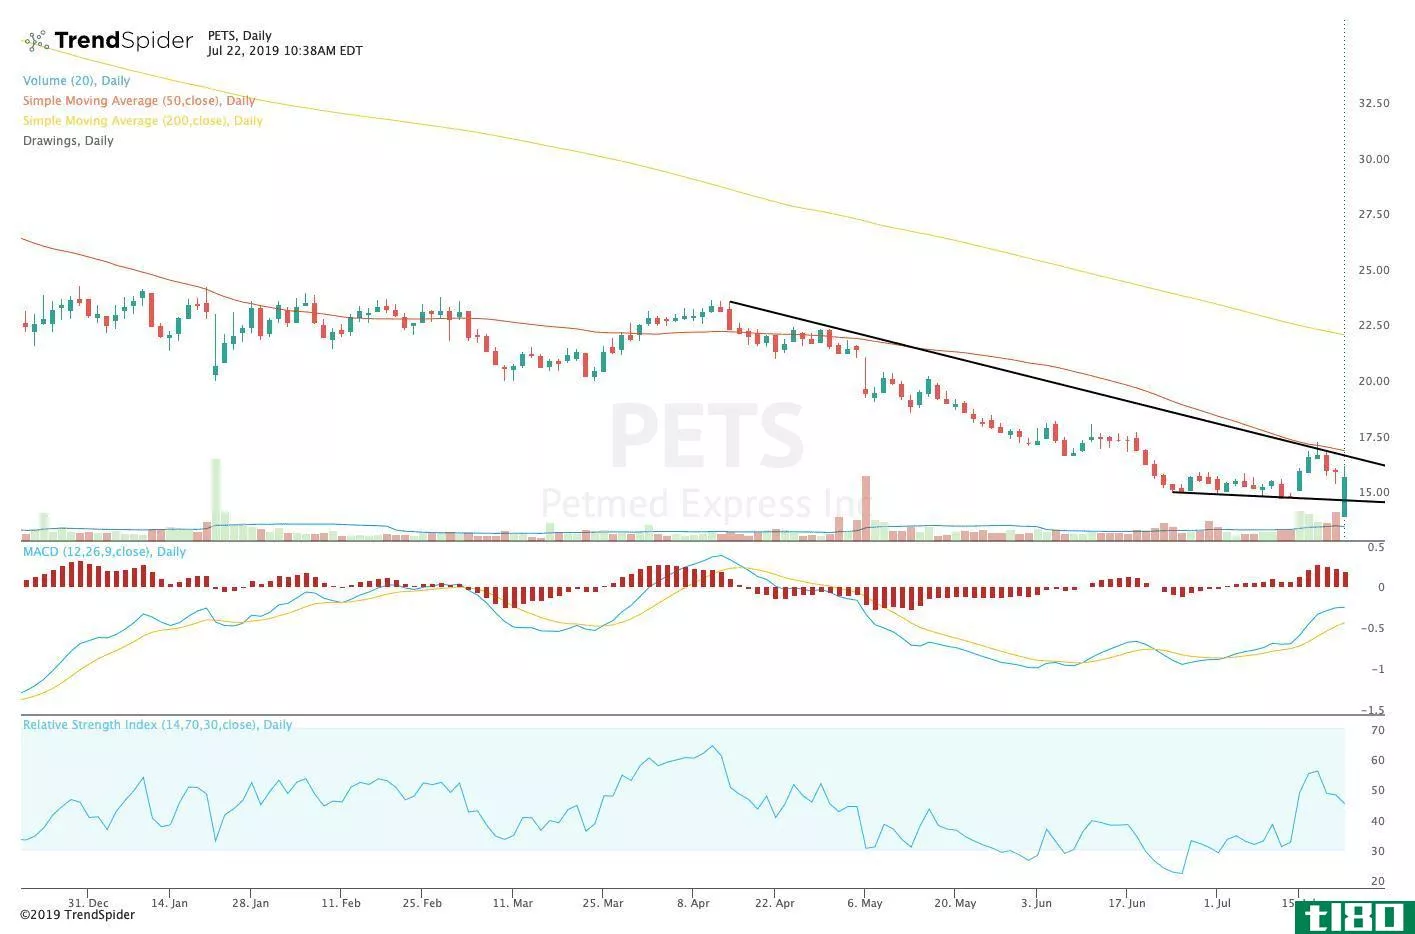 Chart showing the share price performance of PetMed Express, Inc. (PETS)